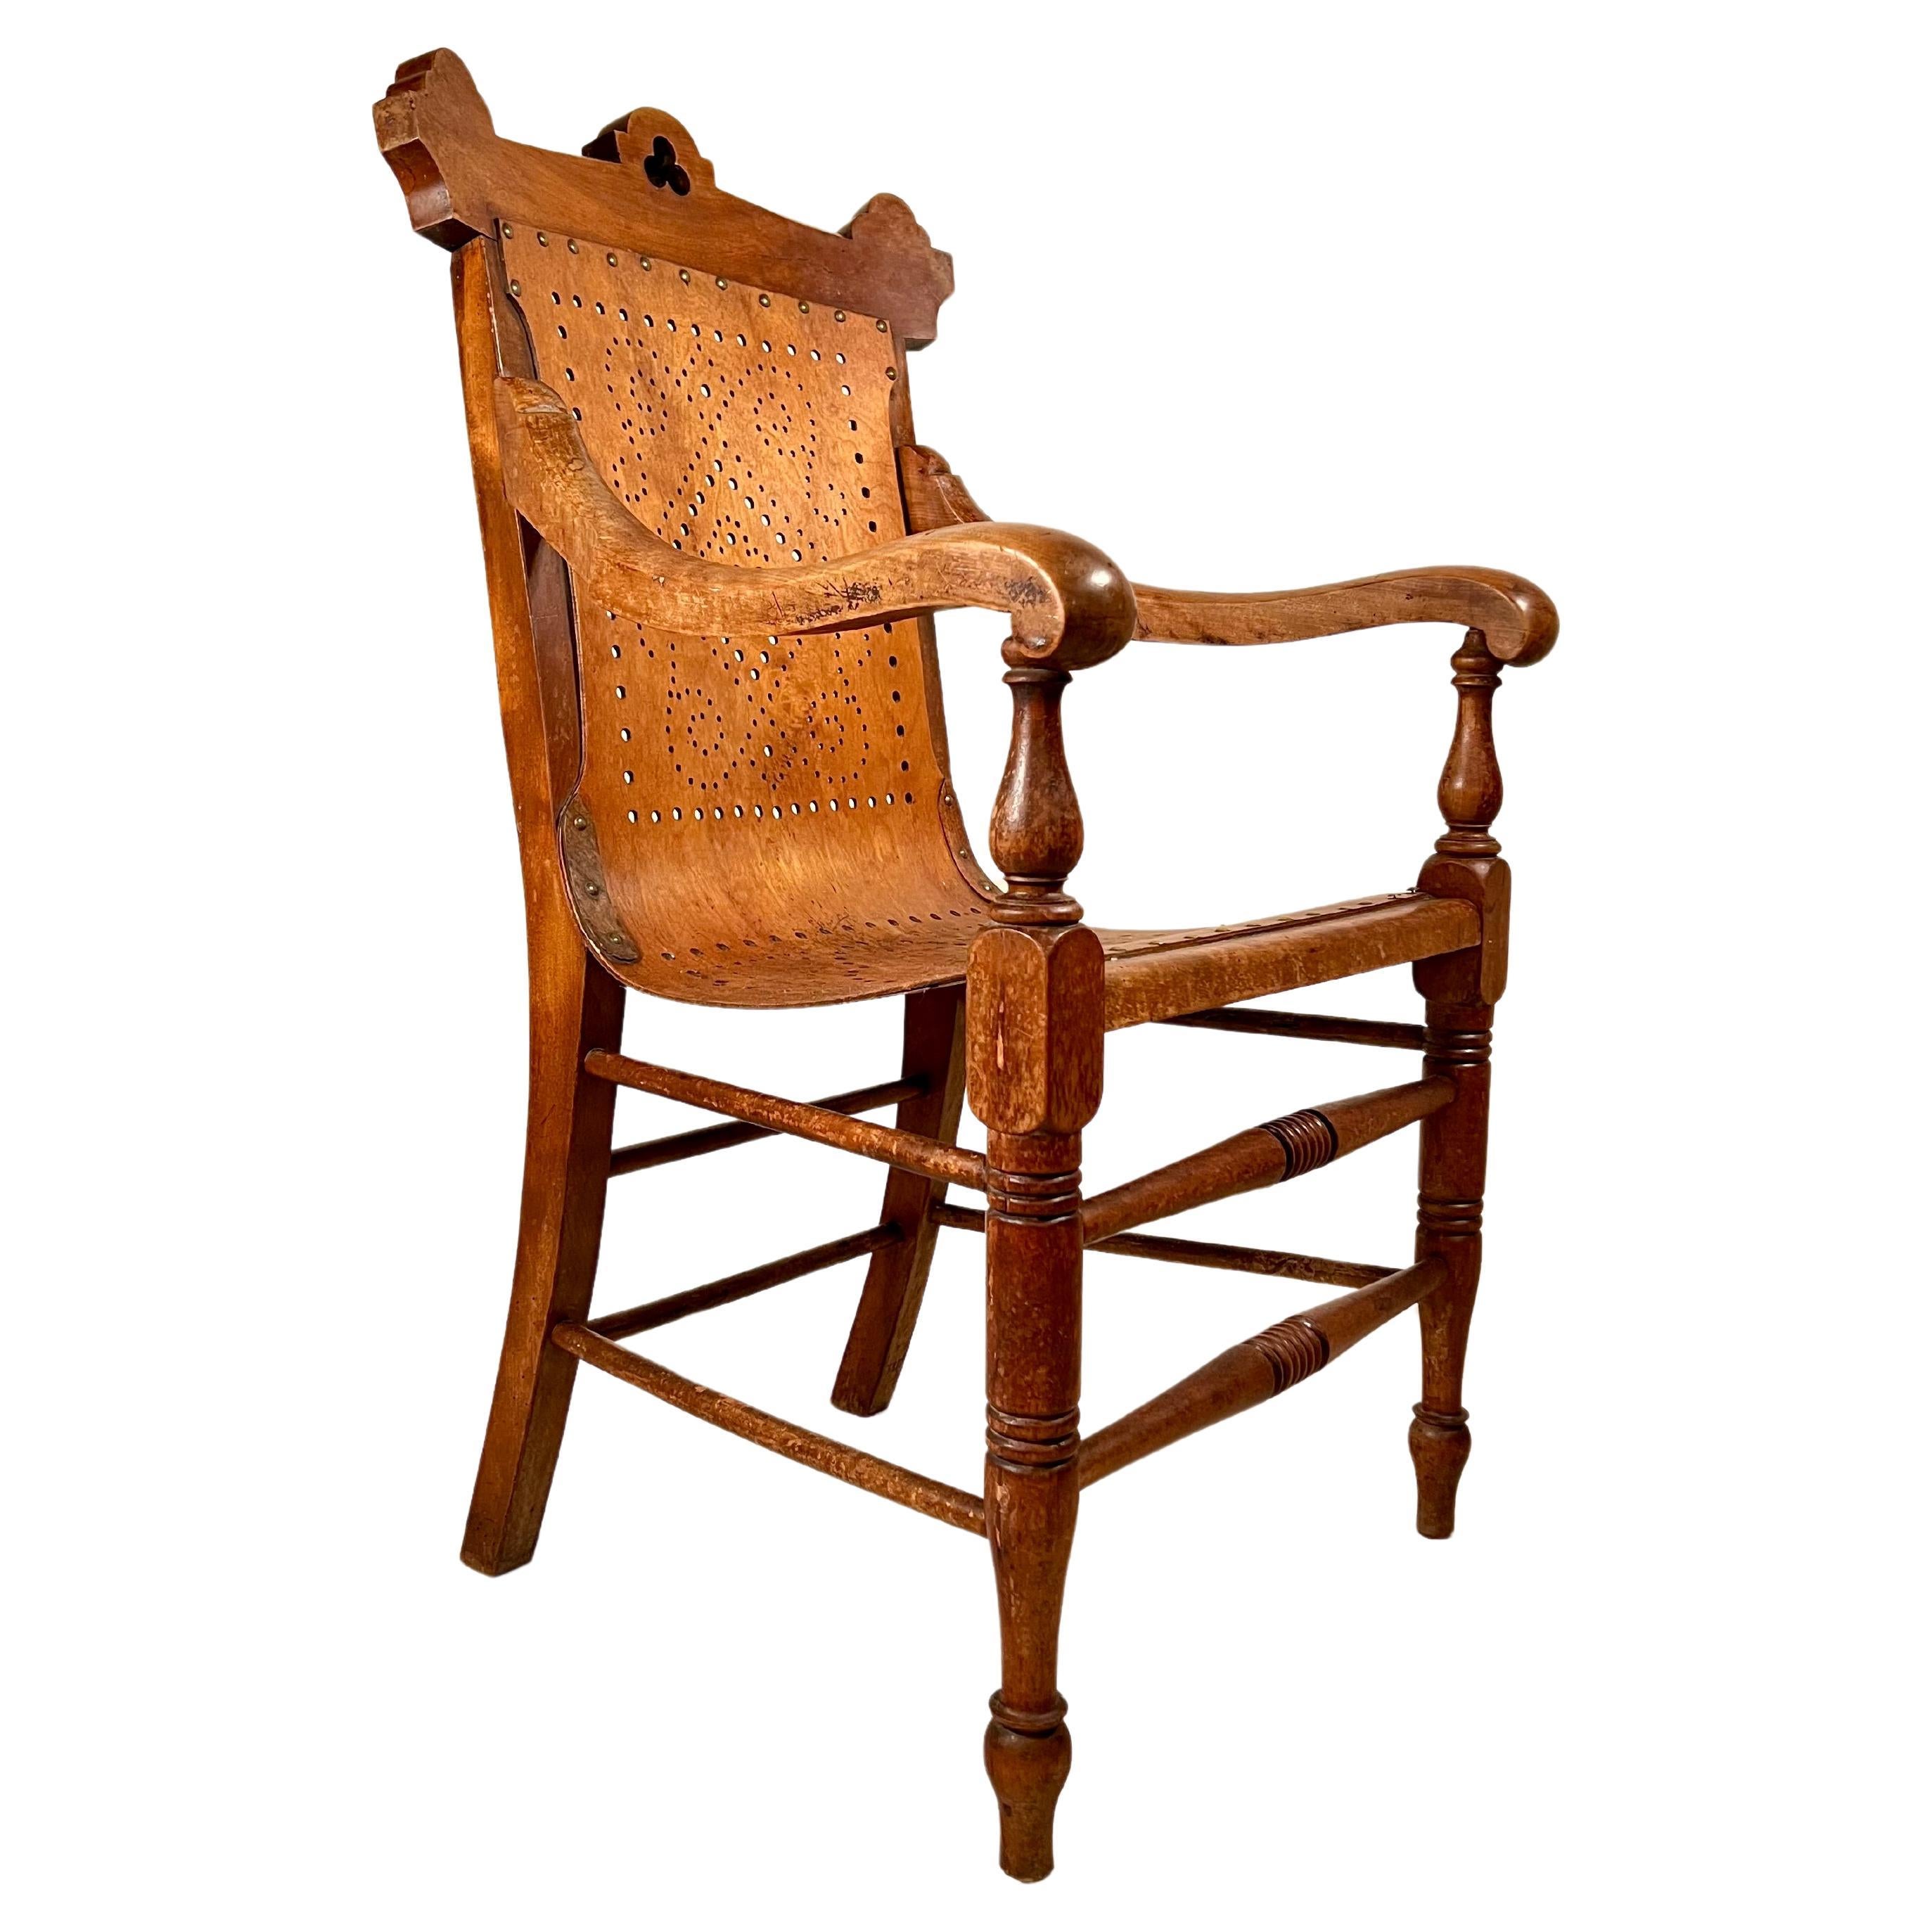 Gardner & Co. Pierced Bent Ply and Oak Frame Arm Chair c.1872